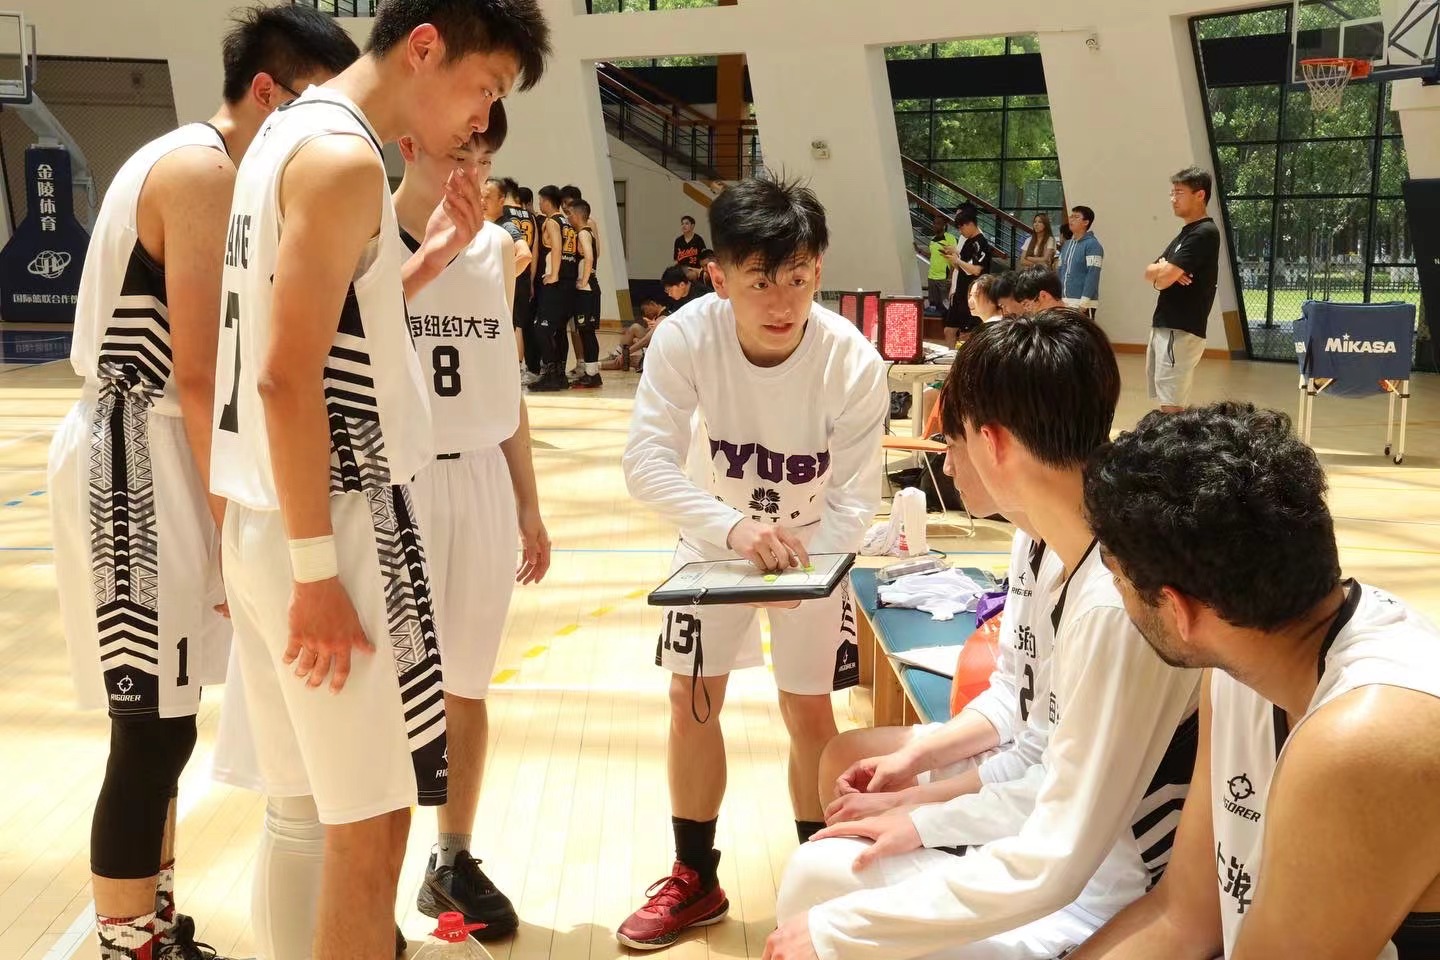 Cai coaching his teammates in a basketball game. 